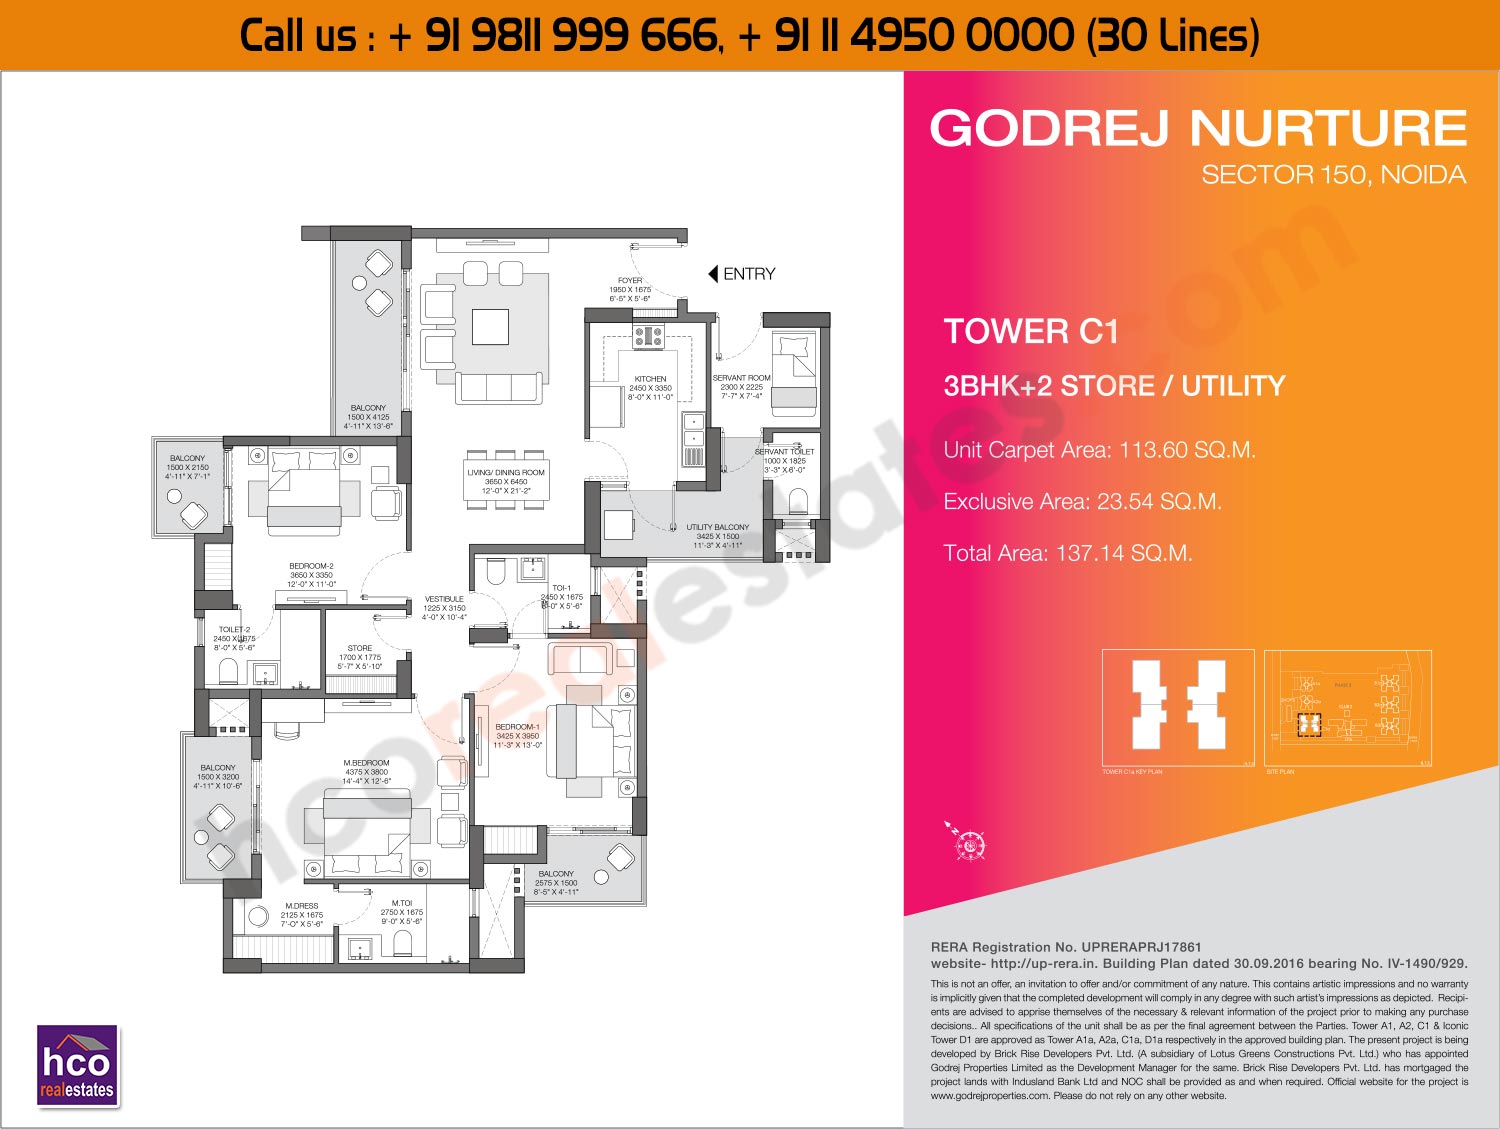 3 BHK + 2, Store Utility, Tower - C1